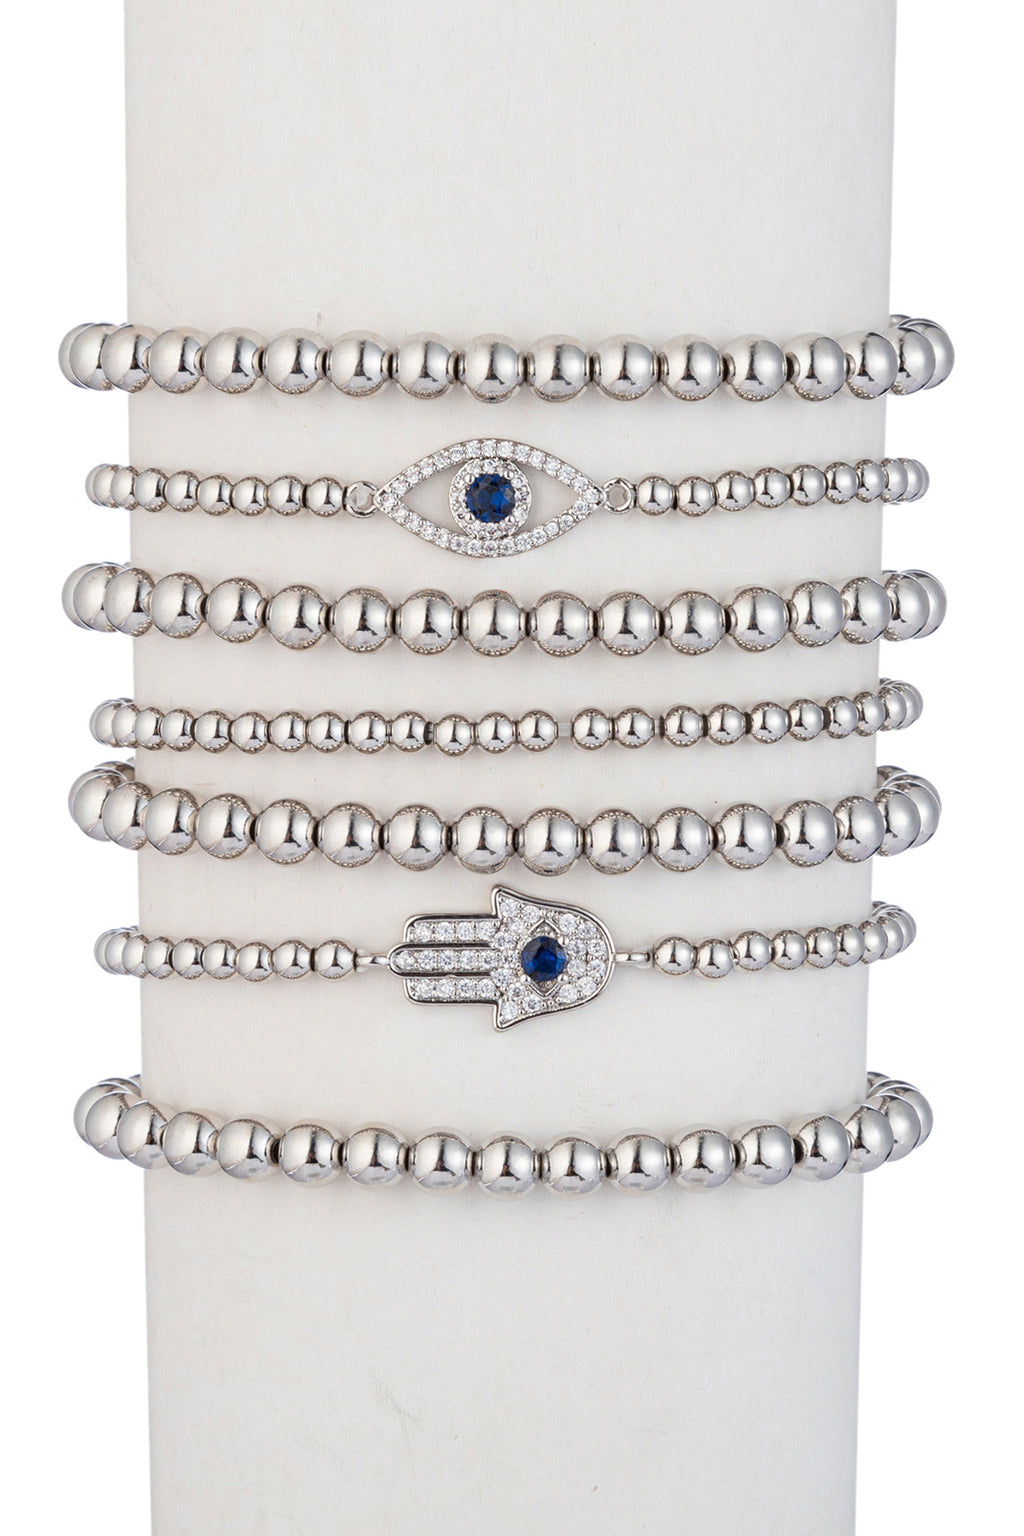 Silver evil eye and hamsa hand beaded bracelet studded with CZ crystals.